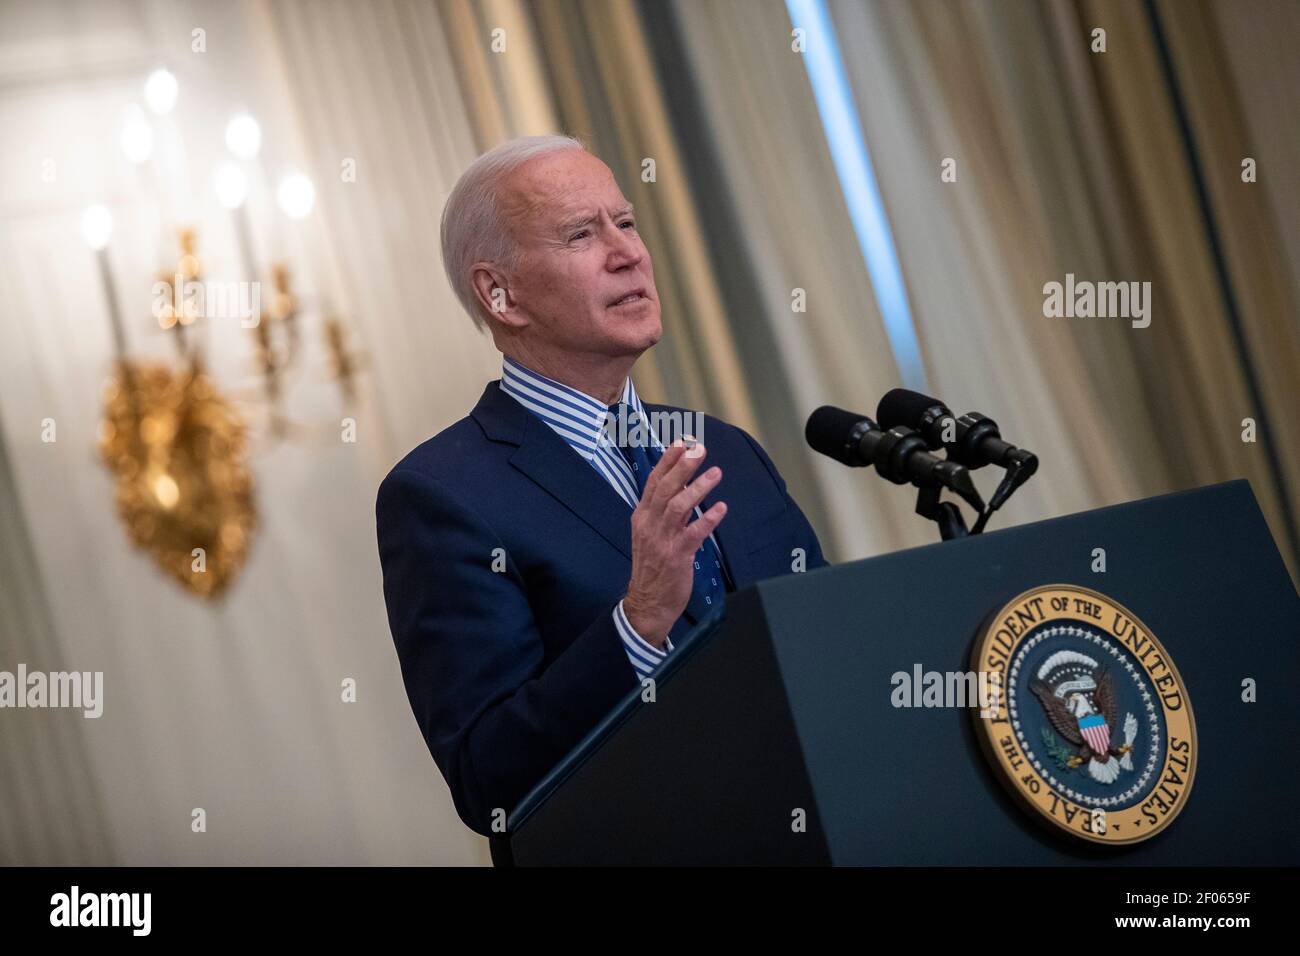 US President Joe Biden delivers remarks on the Senate Passage of the $1.9 trillion coronavirus relief bill from the State Dining Room of the White House in Washington, DC, USA, 06 March 2021. The bill now returns to the House for reconciliation where it is scheduled for a vote next Tuesday.Credit: Shawn Thew/Pool via CNP /MediaPunch Stock Photo